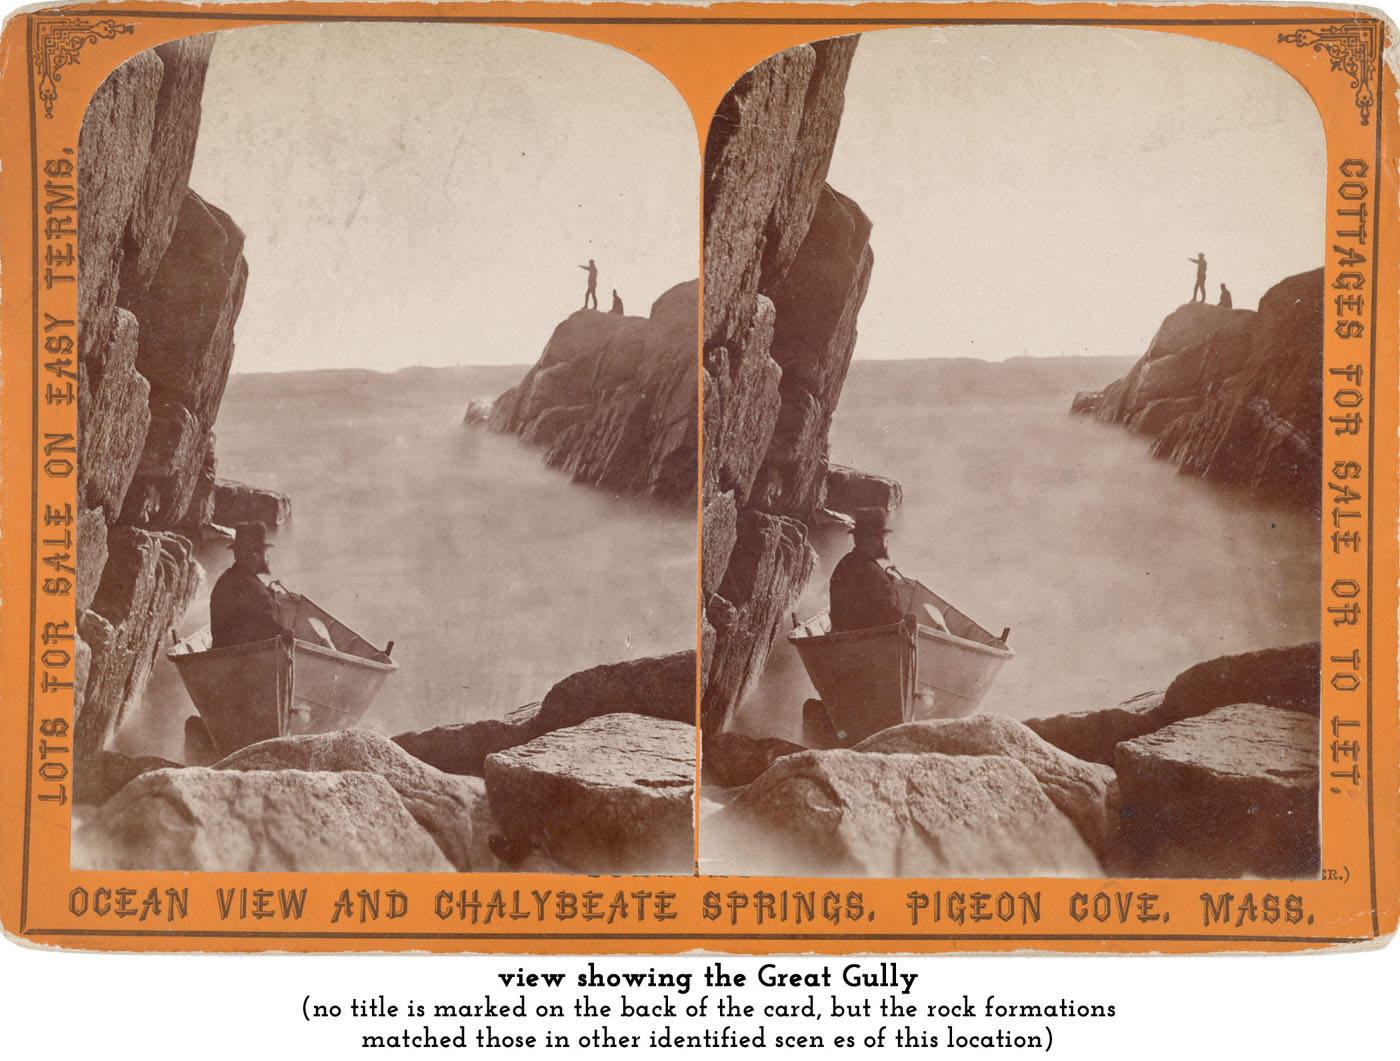 verso of the previous stereoview